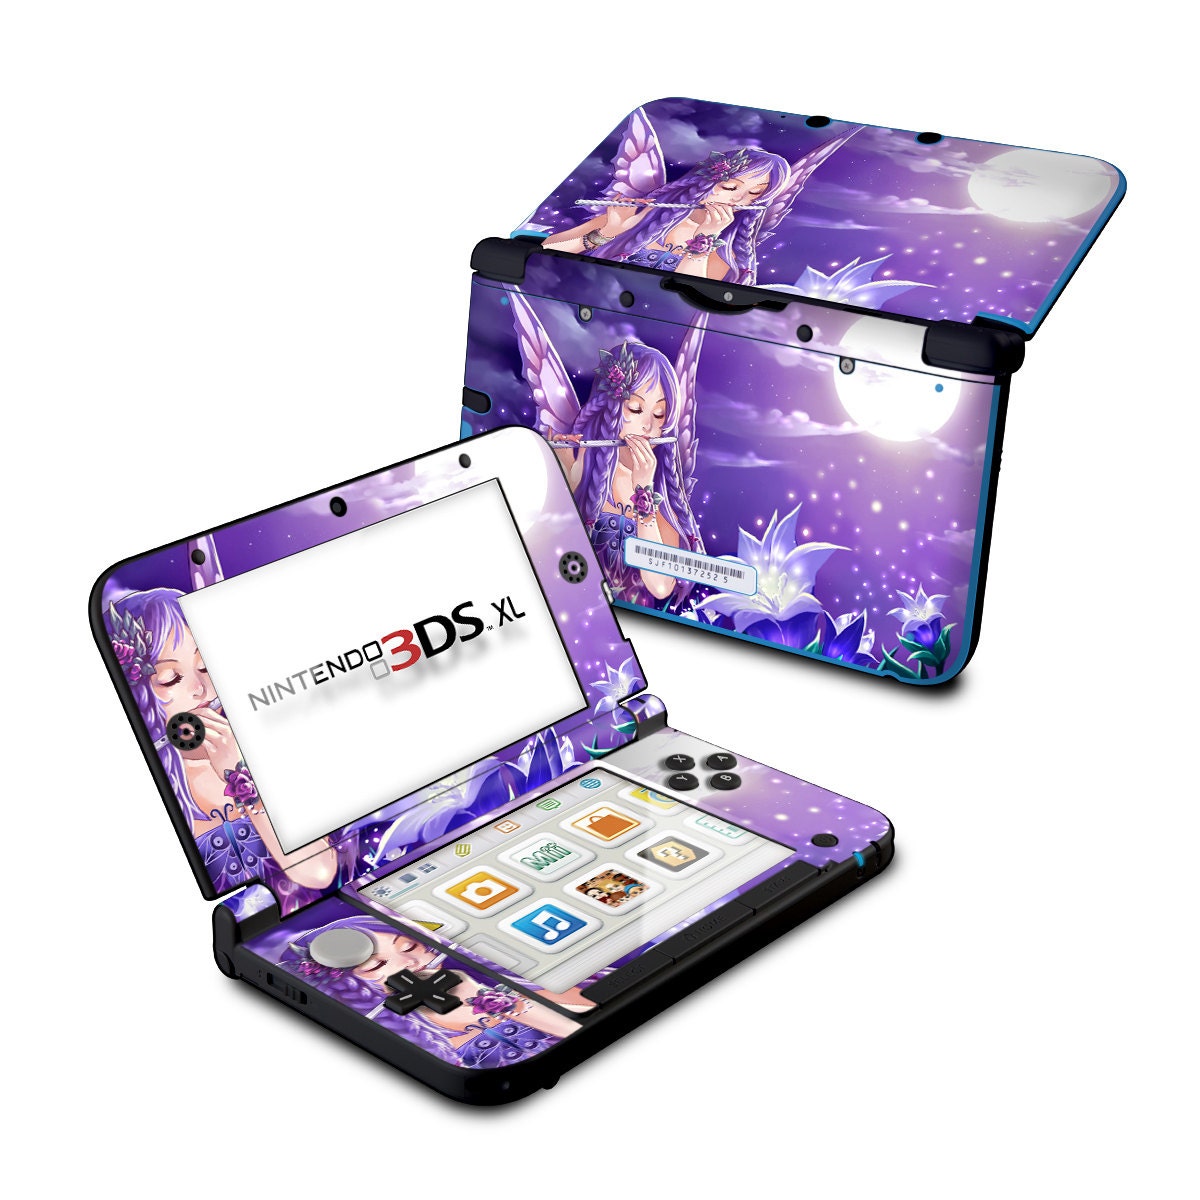 3ds custom themes download